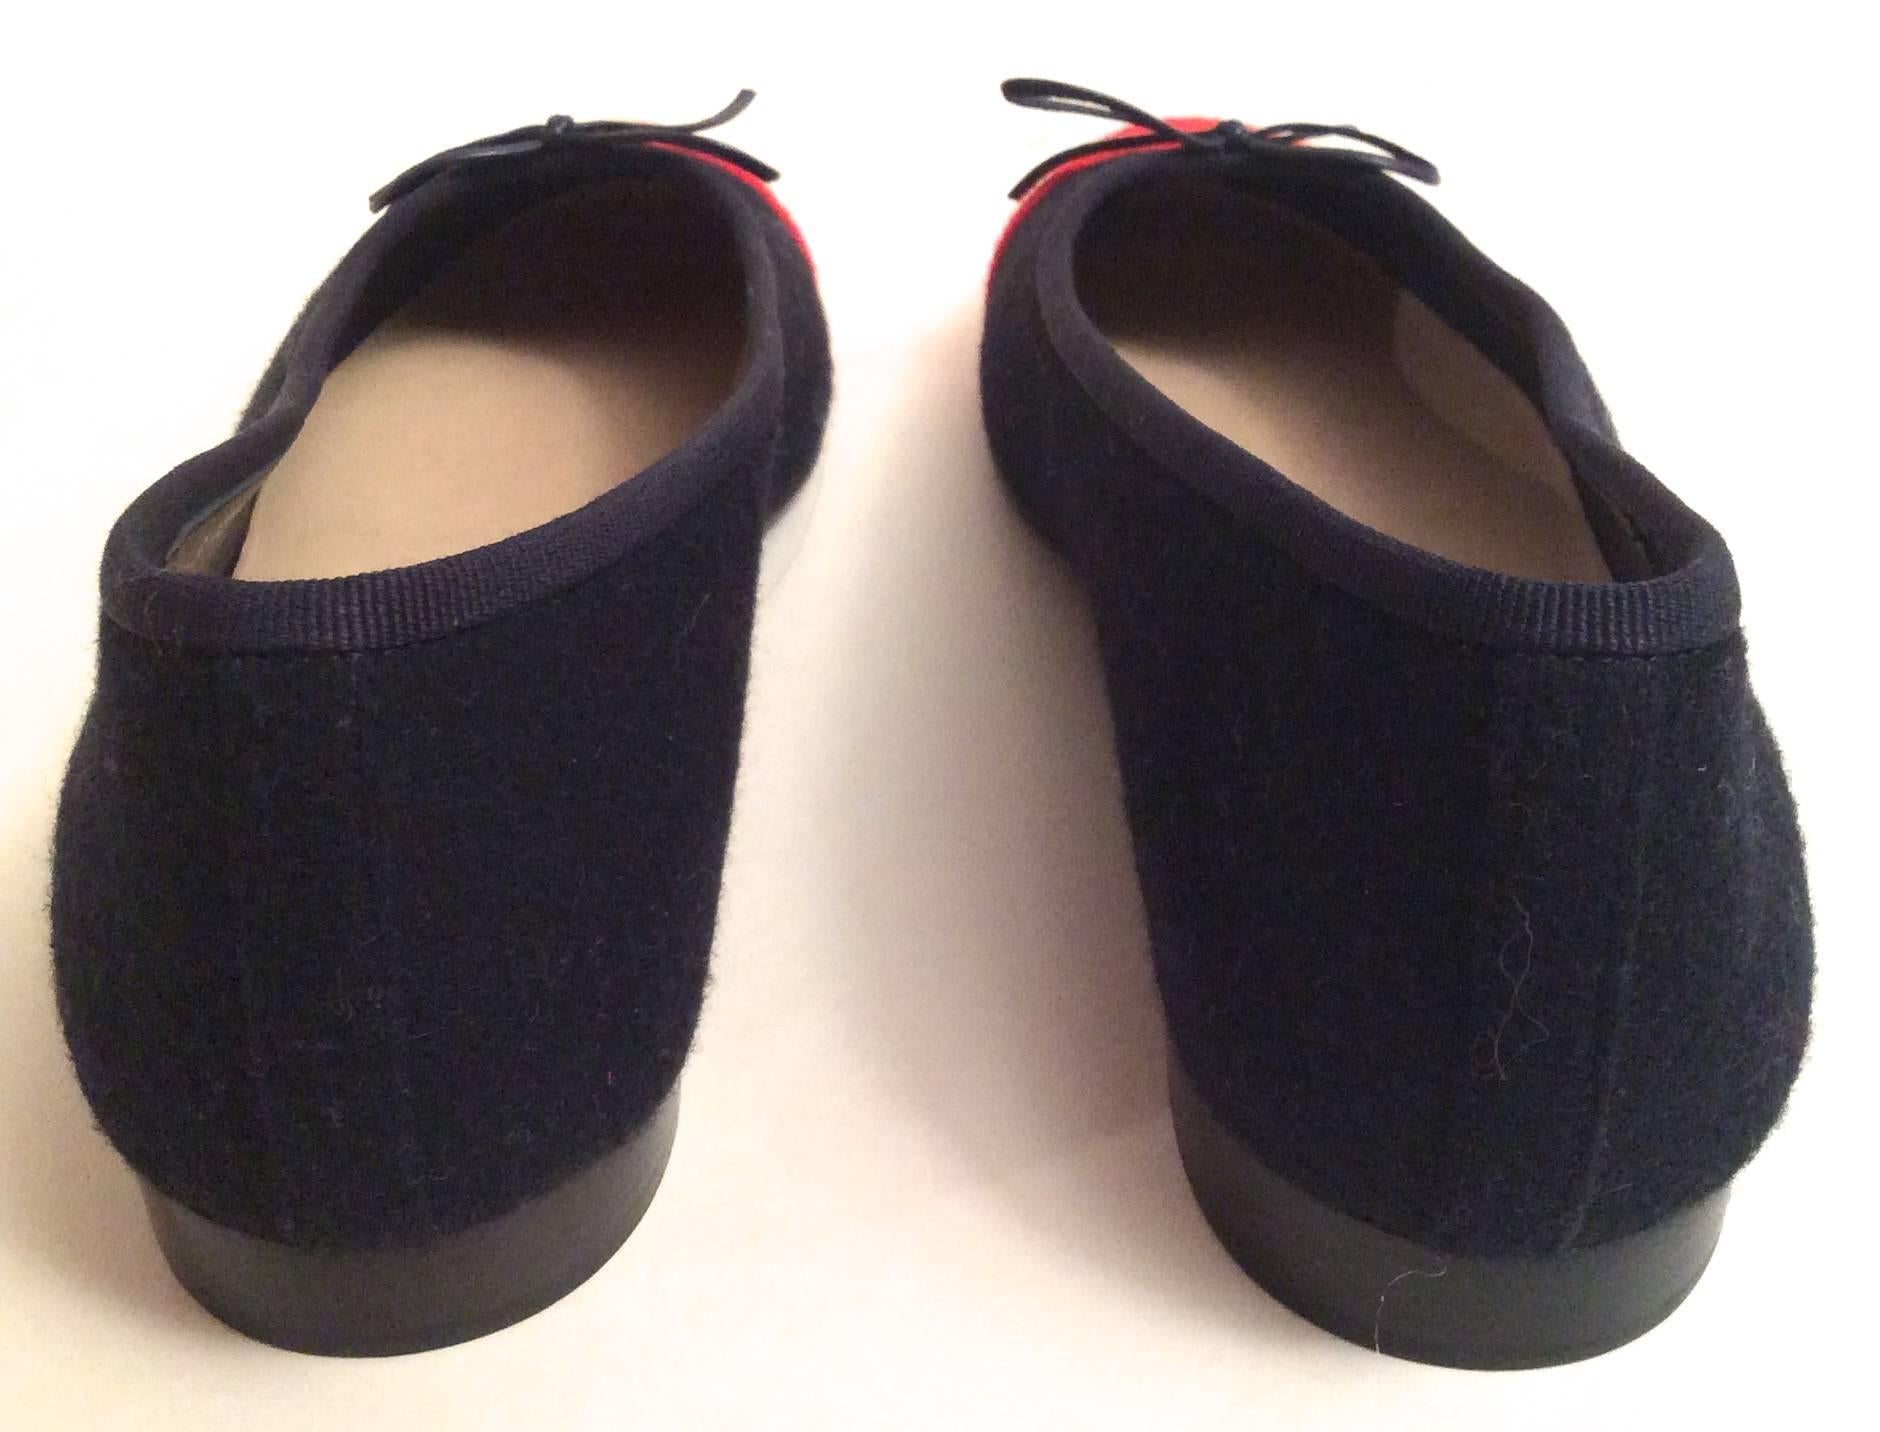 New Chanel  Ballerina flats with n blue and red boucle wool.  Gorgeous classic shoe that is versatile for all occasions. There is a CC logo sewn into the red toe region of the front of the shoe. Inside the shoe there is the Chanel logo stamped in